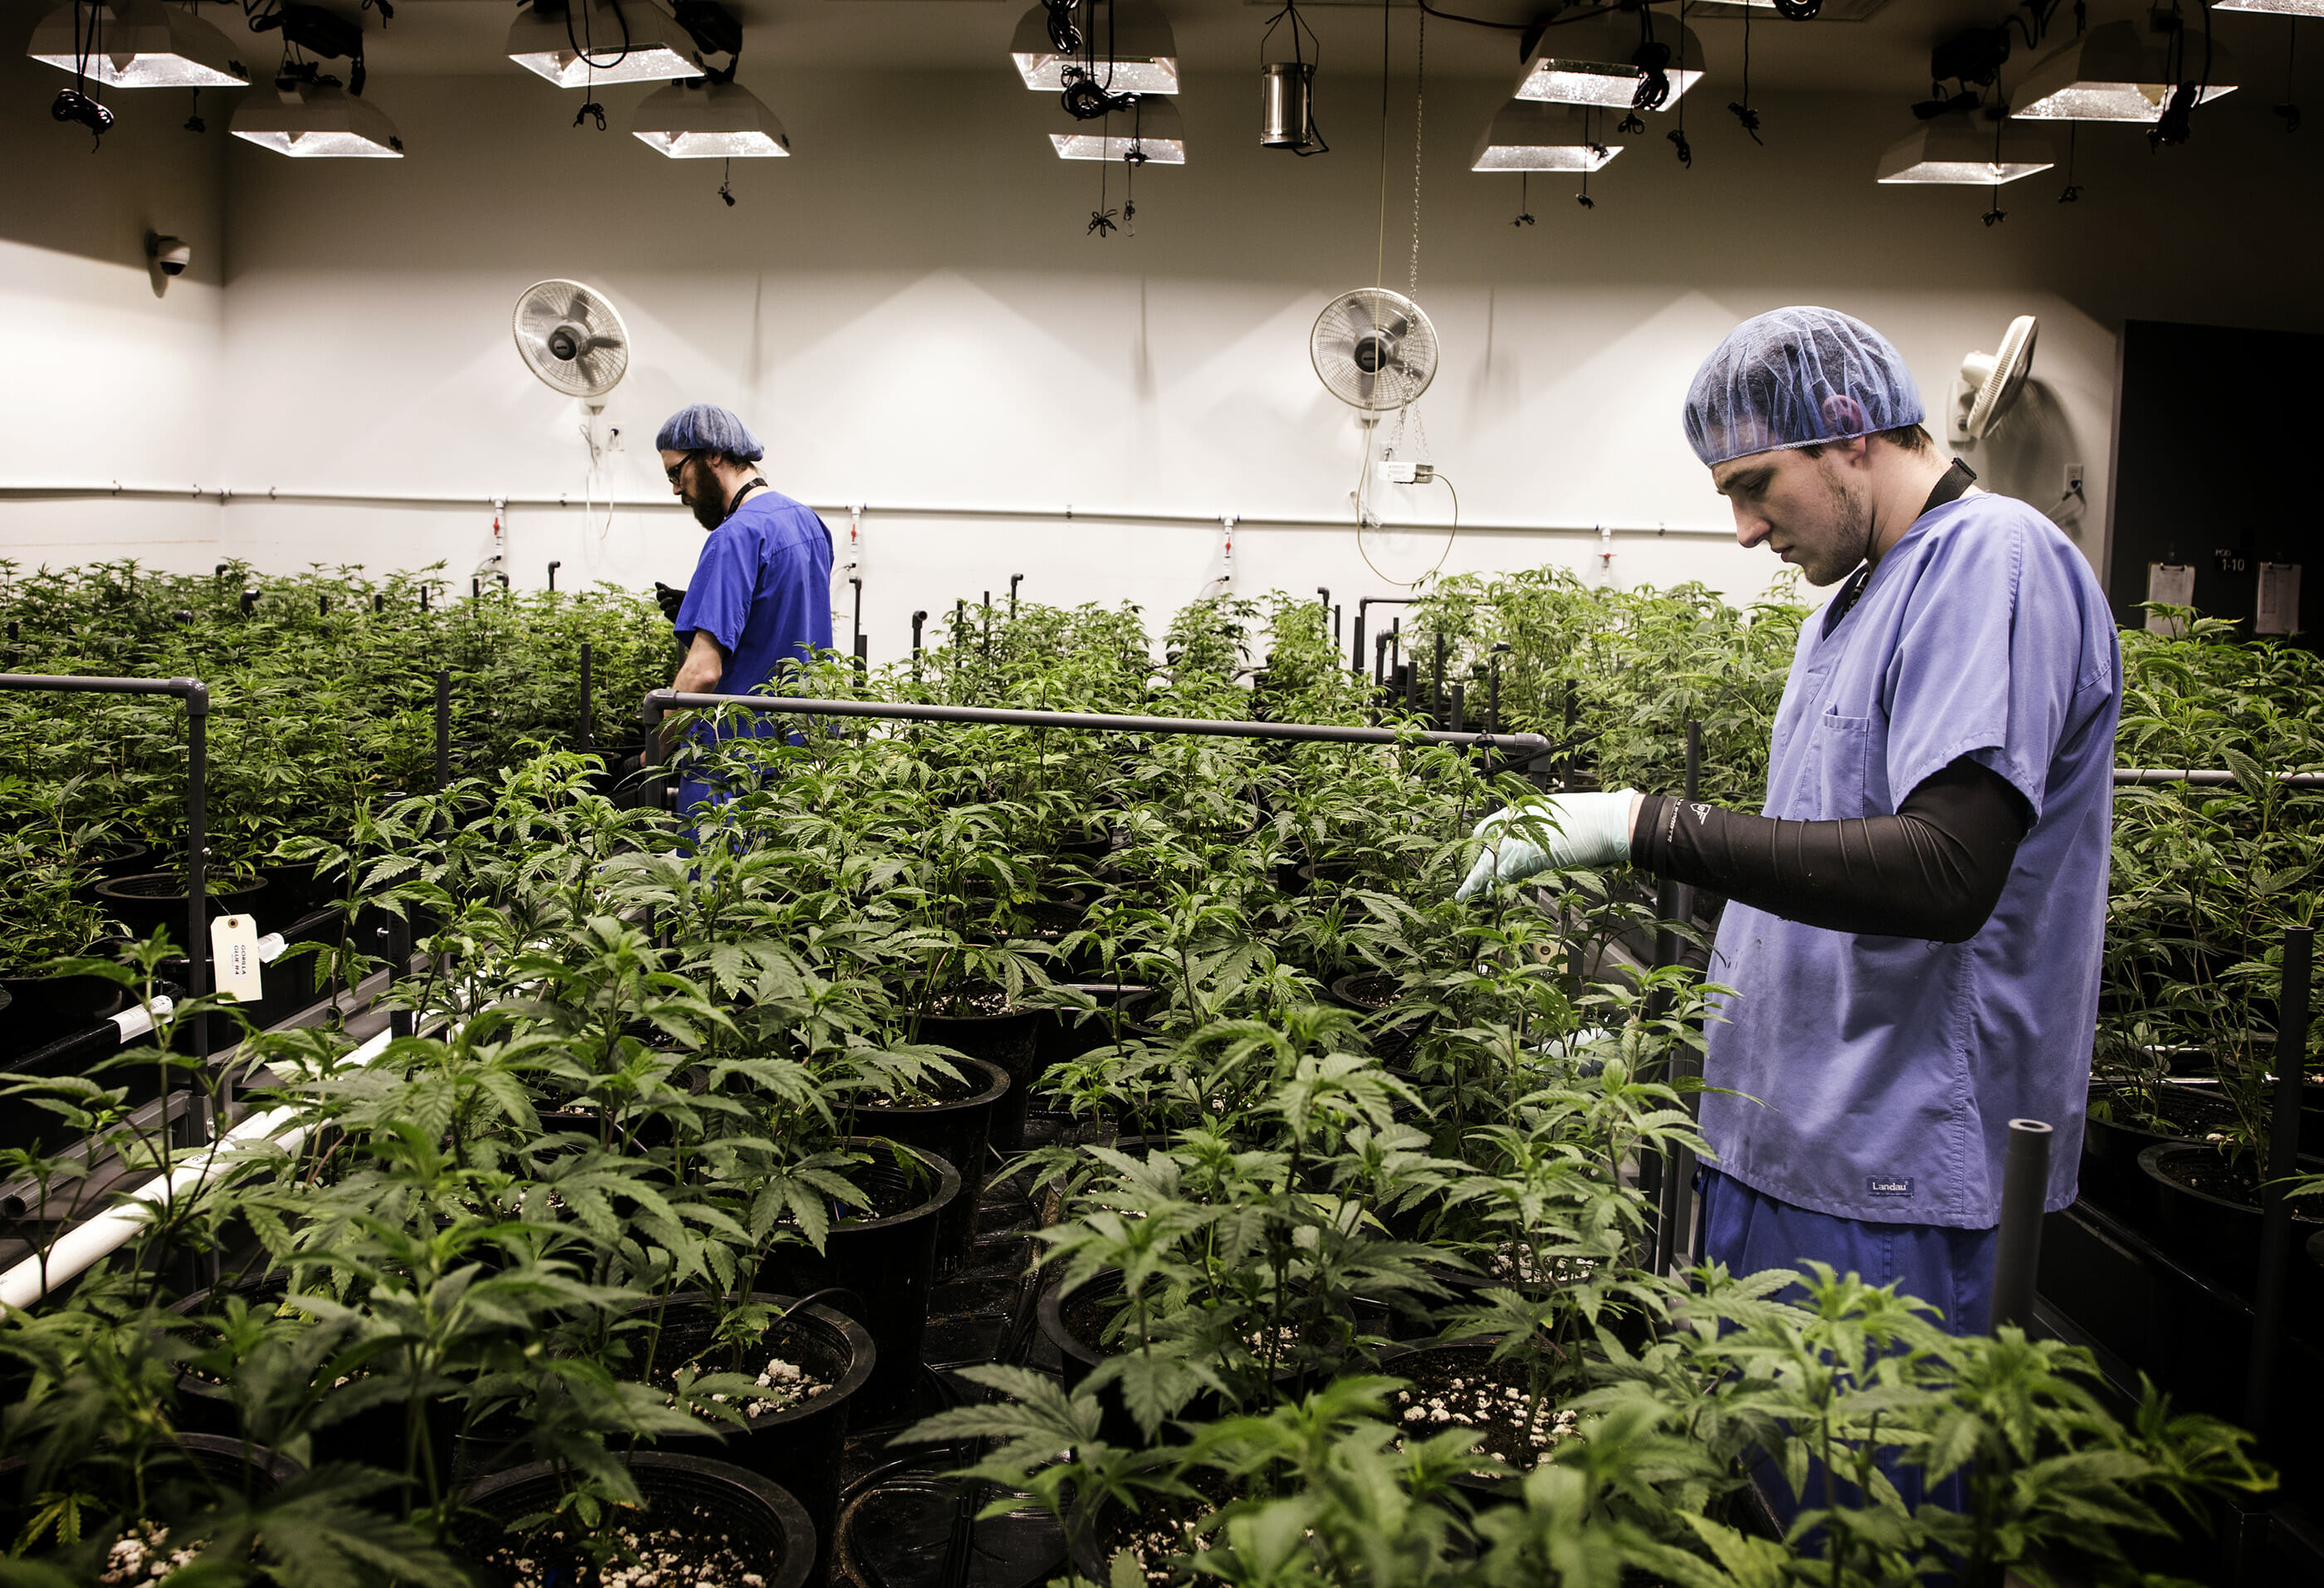 Two employees working on an irrigation system amid rows of cannabis